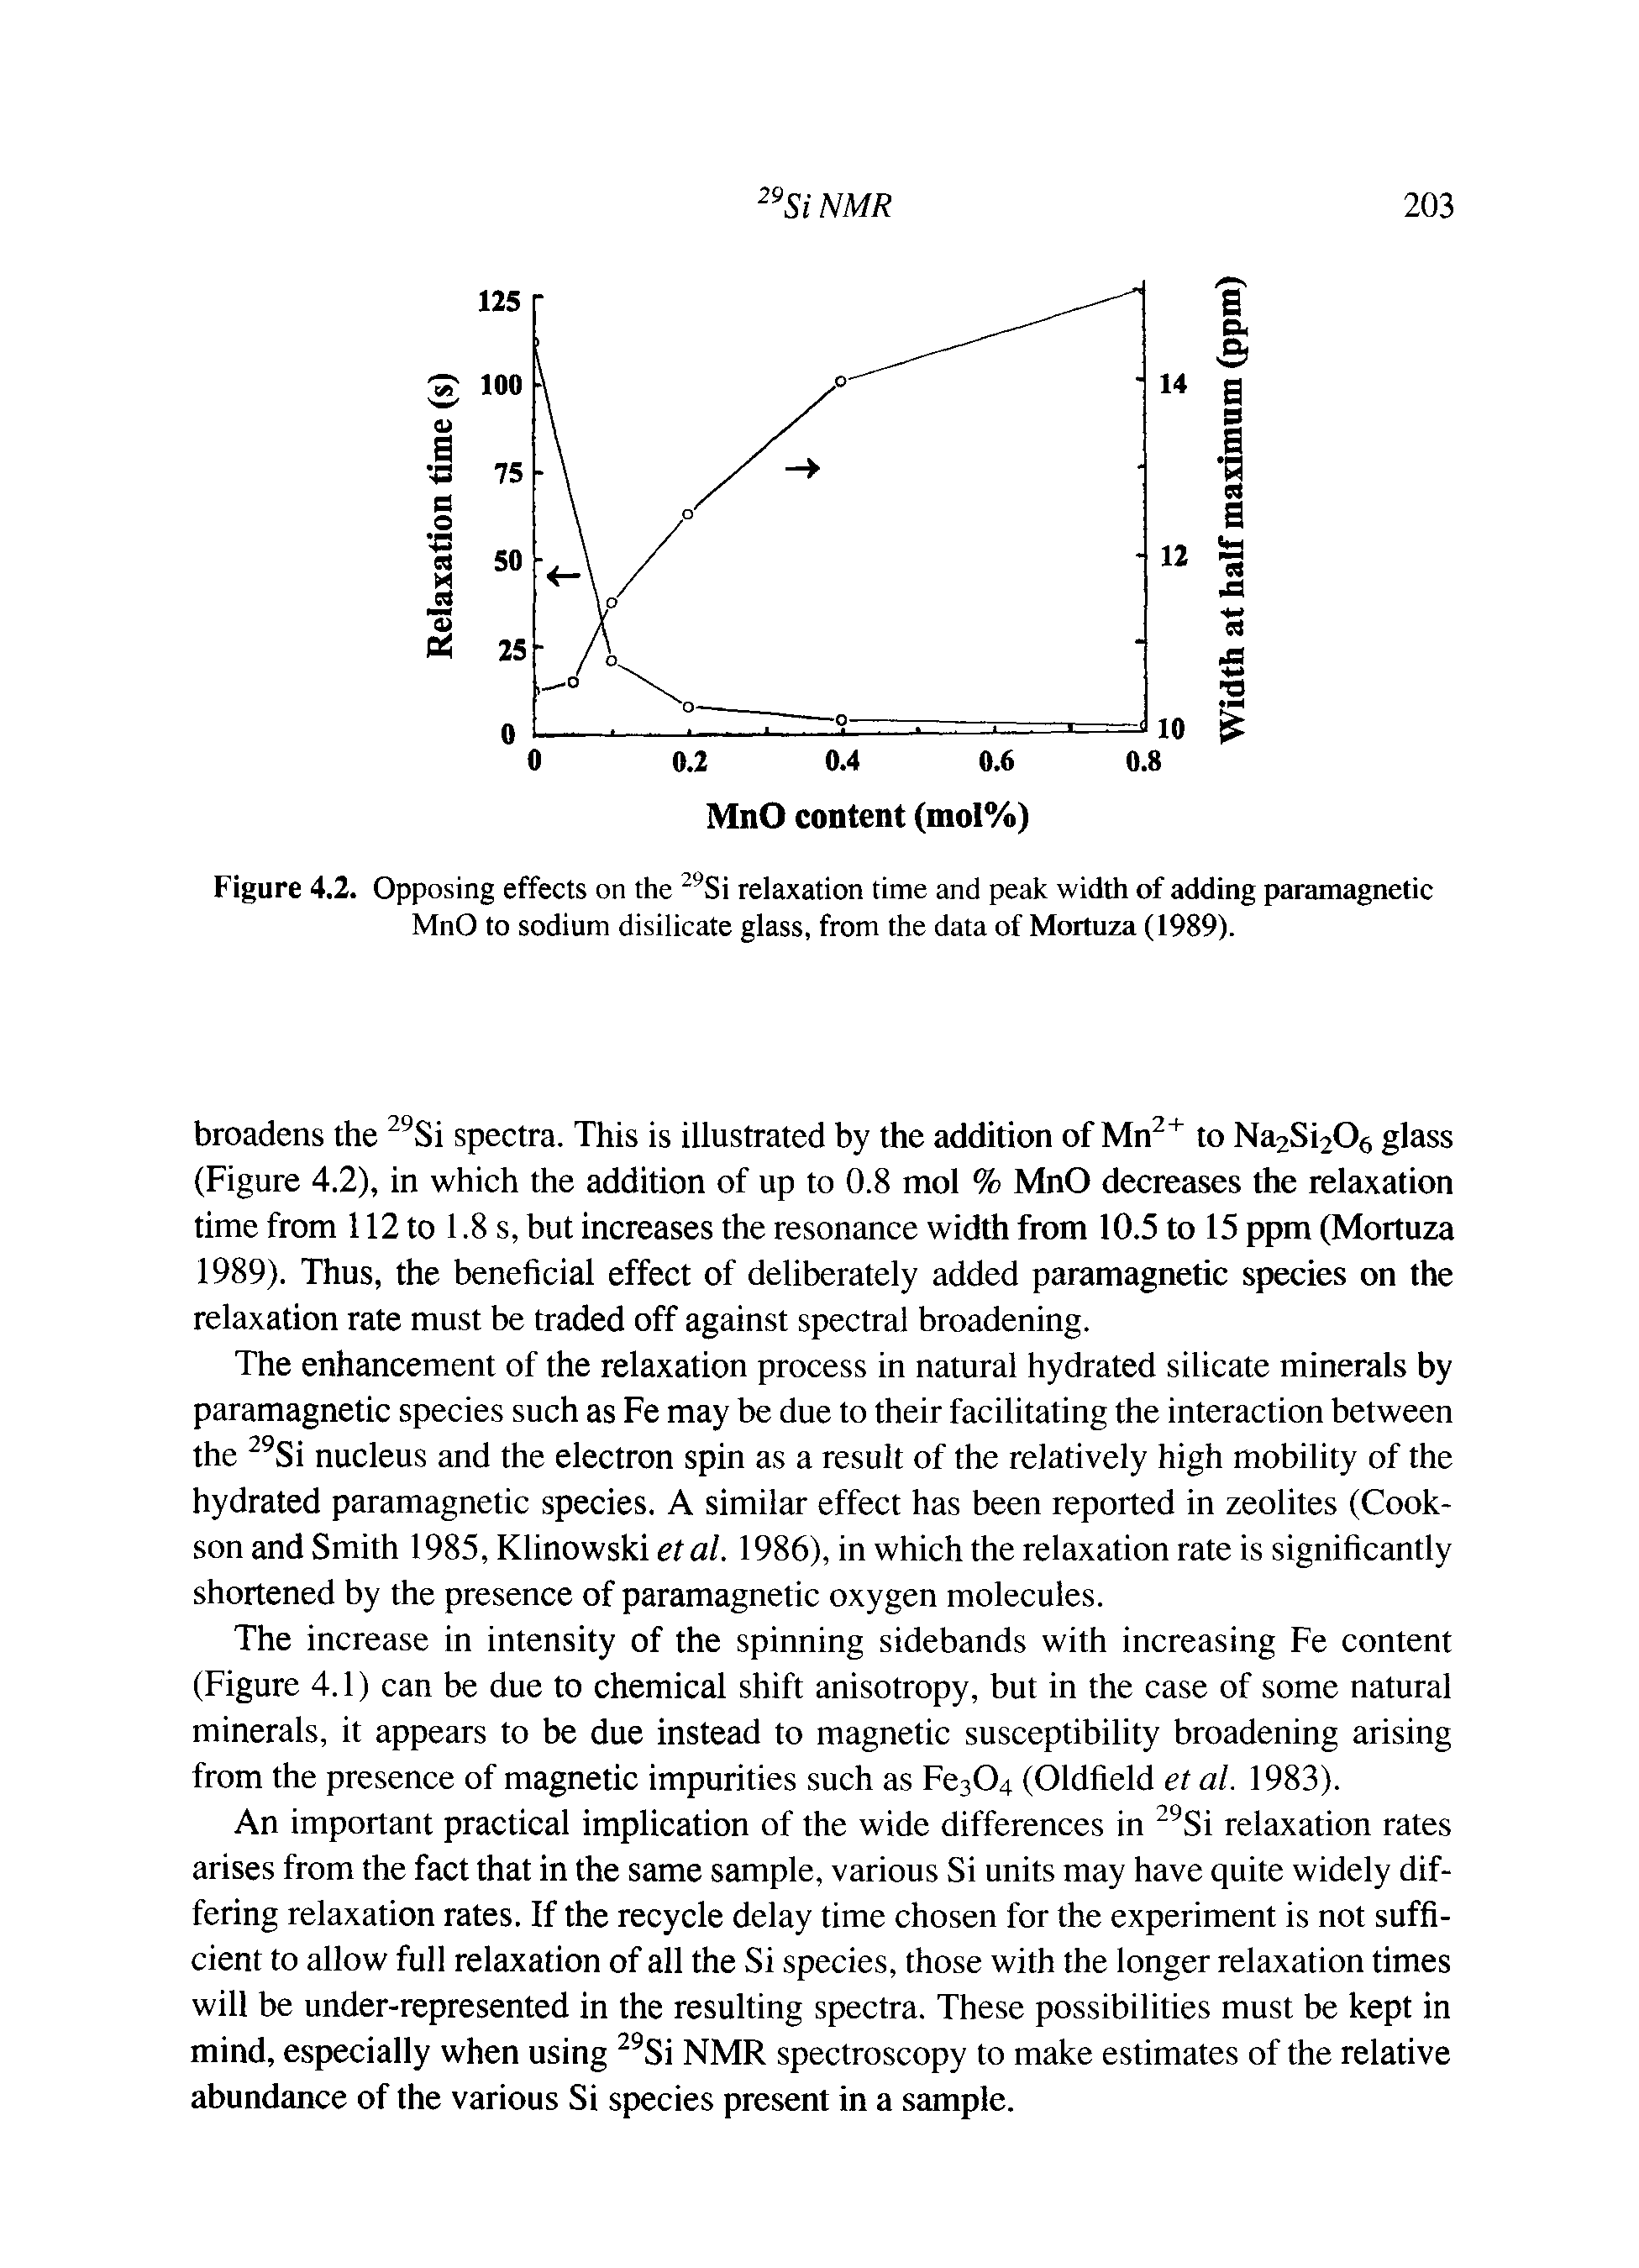 Figure 4.2. Opposing effects on the Si relaxation time and peak width of adding paramagnetic MnO to sodium disilicate glass, from the data of Mortuza (1989).